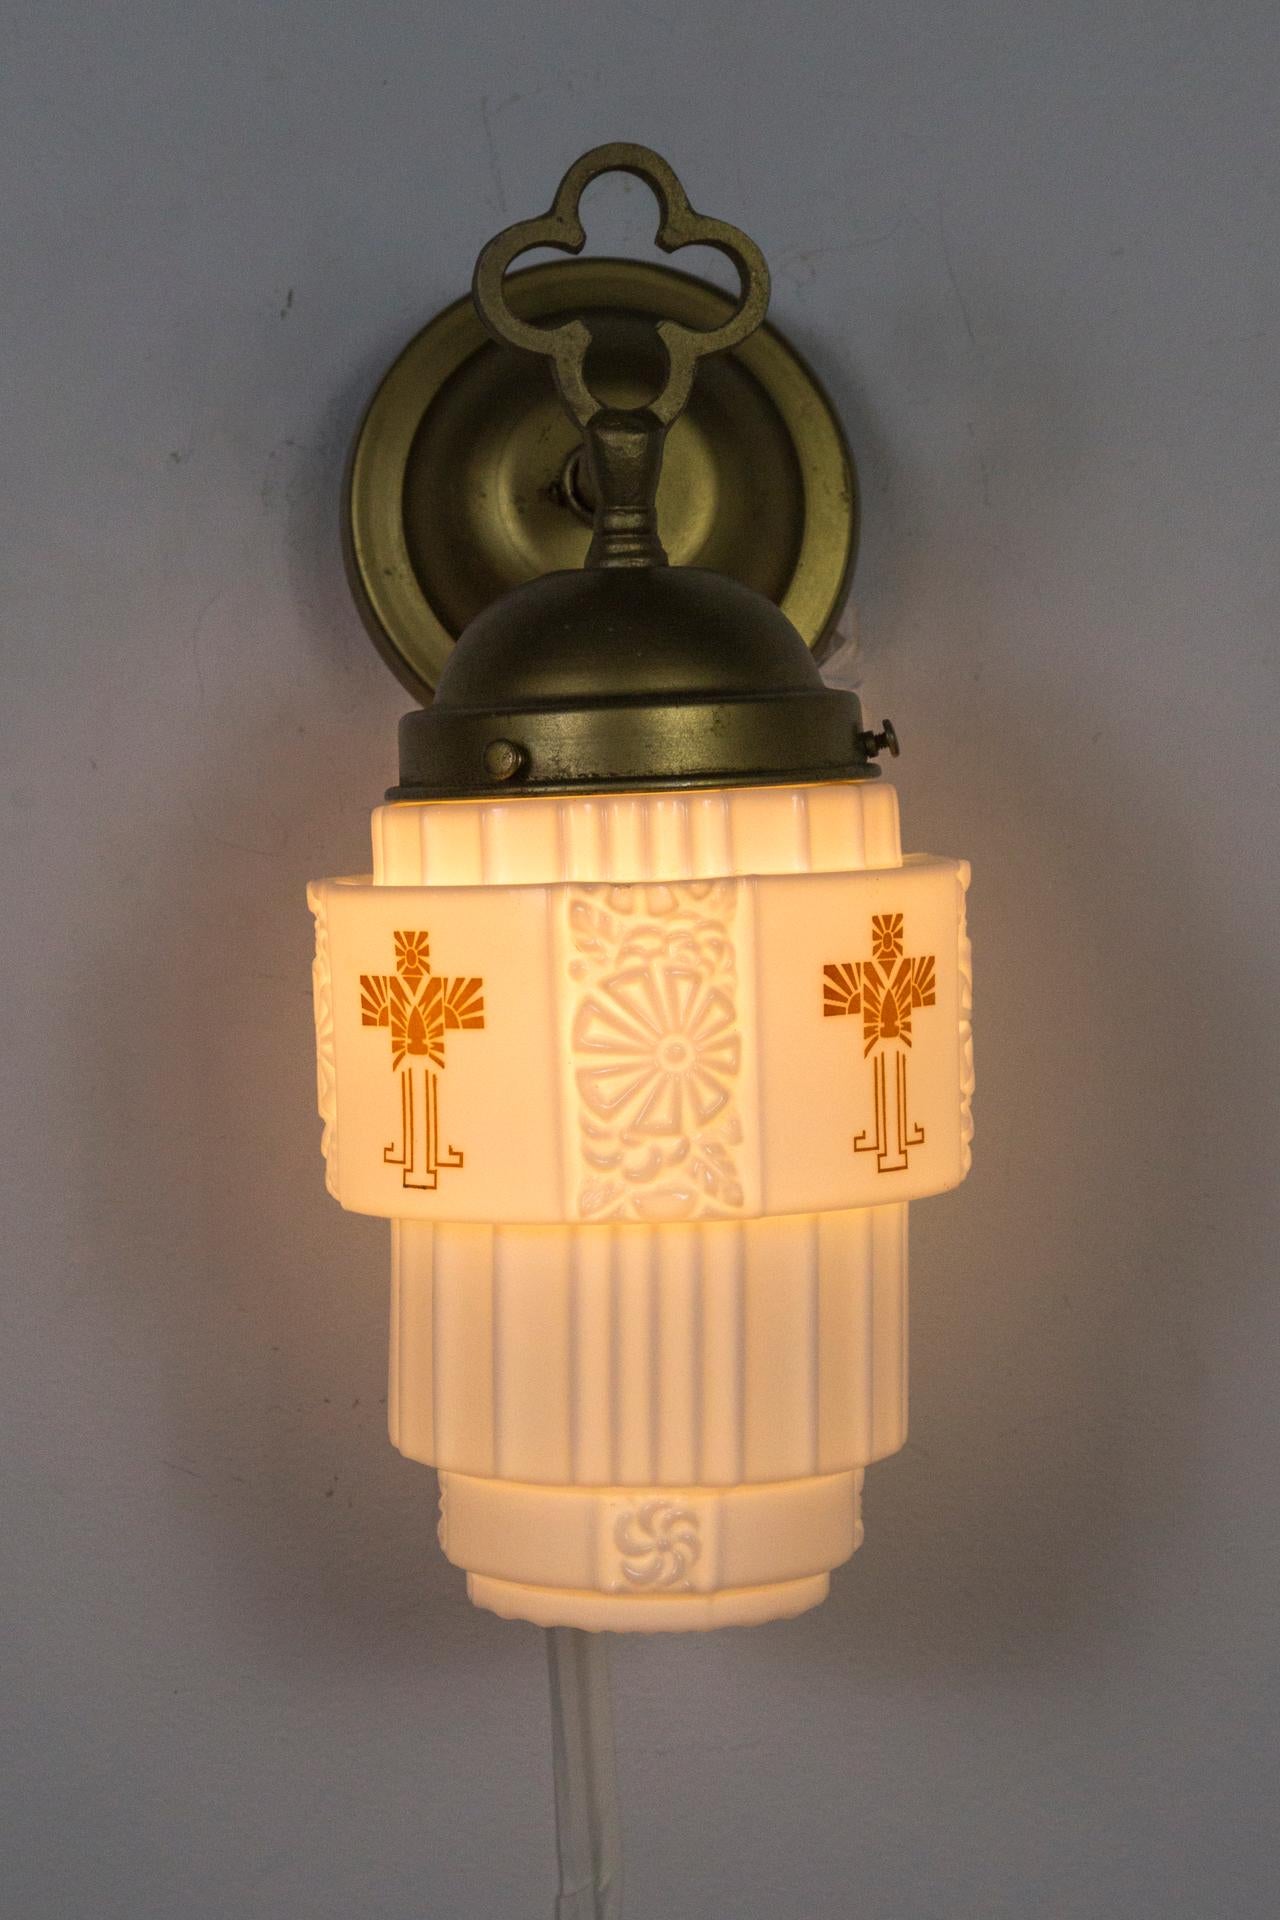 A pair of stepped, cylindrical, moulded, milk glass wall lights with gilded caps topped with a quatrefoils. Gothic influenced Art Deco pieces with imprinted flowers and printed crosses from the 1920s. 13.5 height x 8